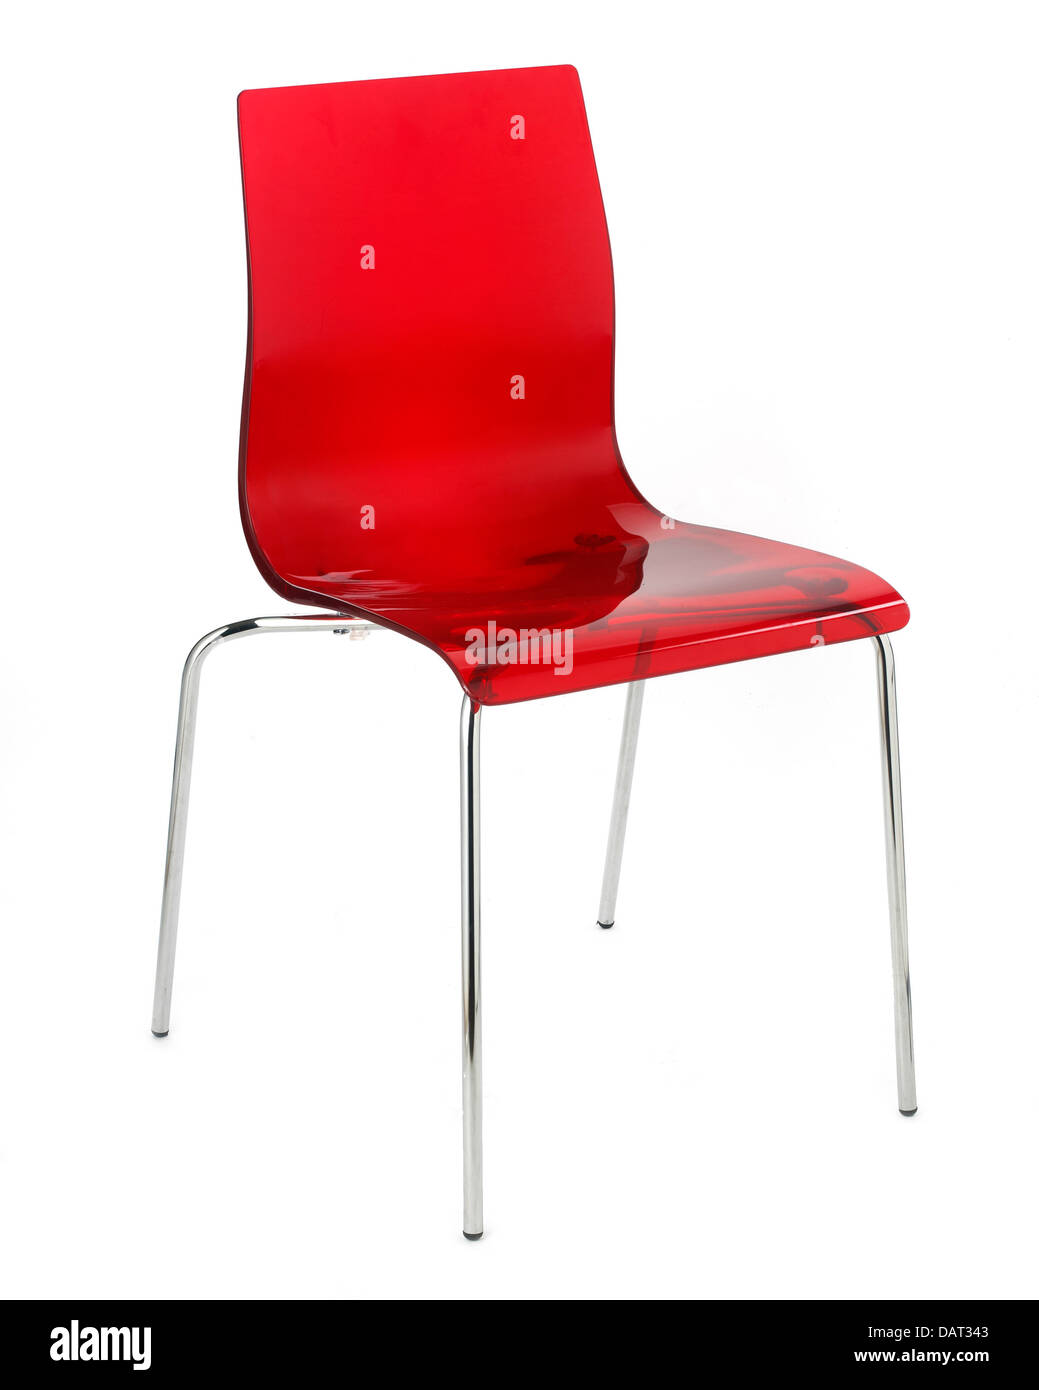 red plastic chair cut out onto a white background Stock Photo